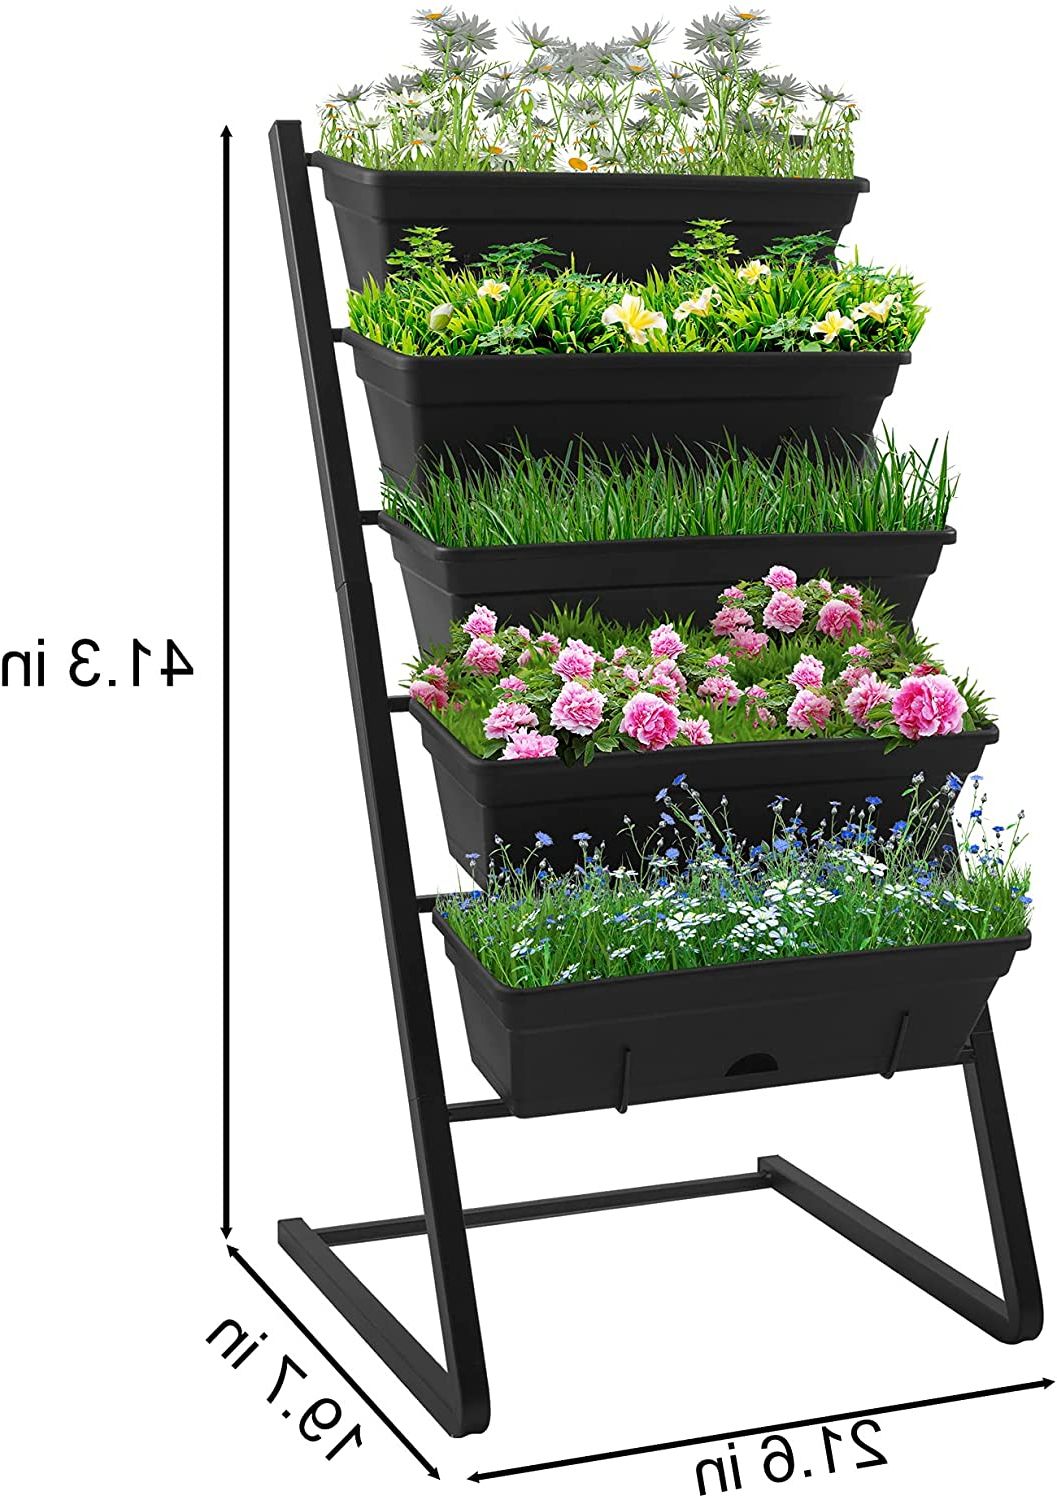 Latest Plant Stands With Flower Box Throughout Raised Garden Bed, Multi Tier Plant Stand Flower Display Rack, Vertical  Garden Freestanding Elevated Planters With 5 Container Boxes, Cascading  Water Drainage, For Patio Balcony Indoor Outdoor – Walmart (View 13 of 15)